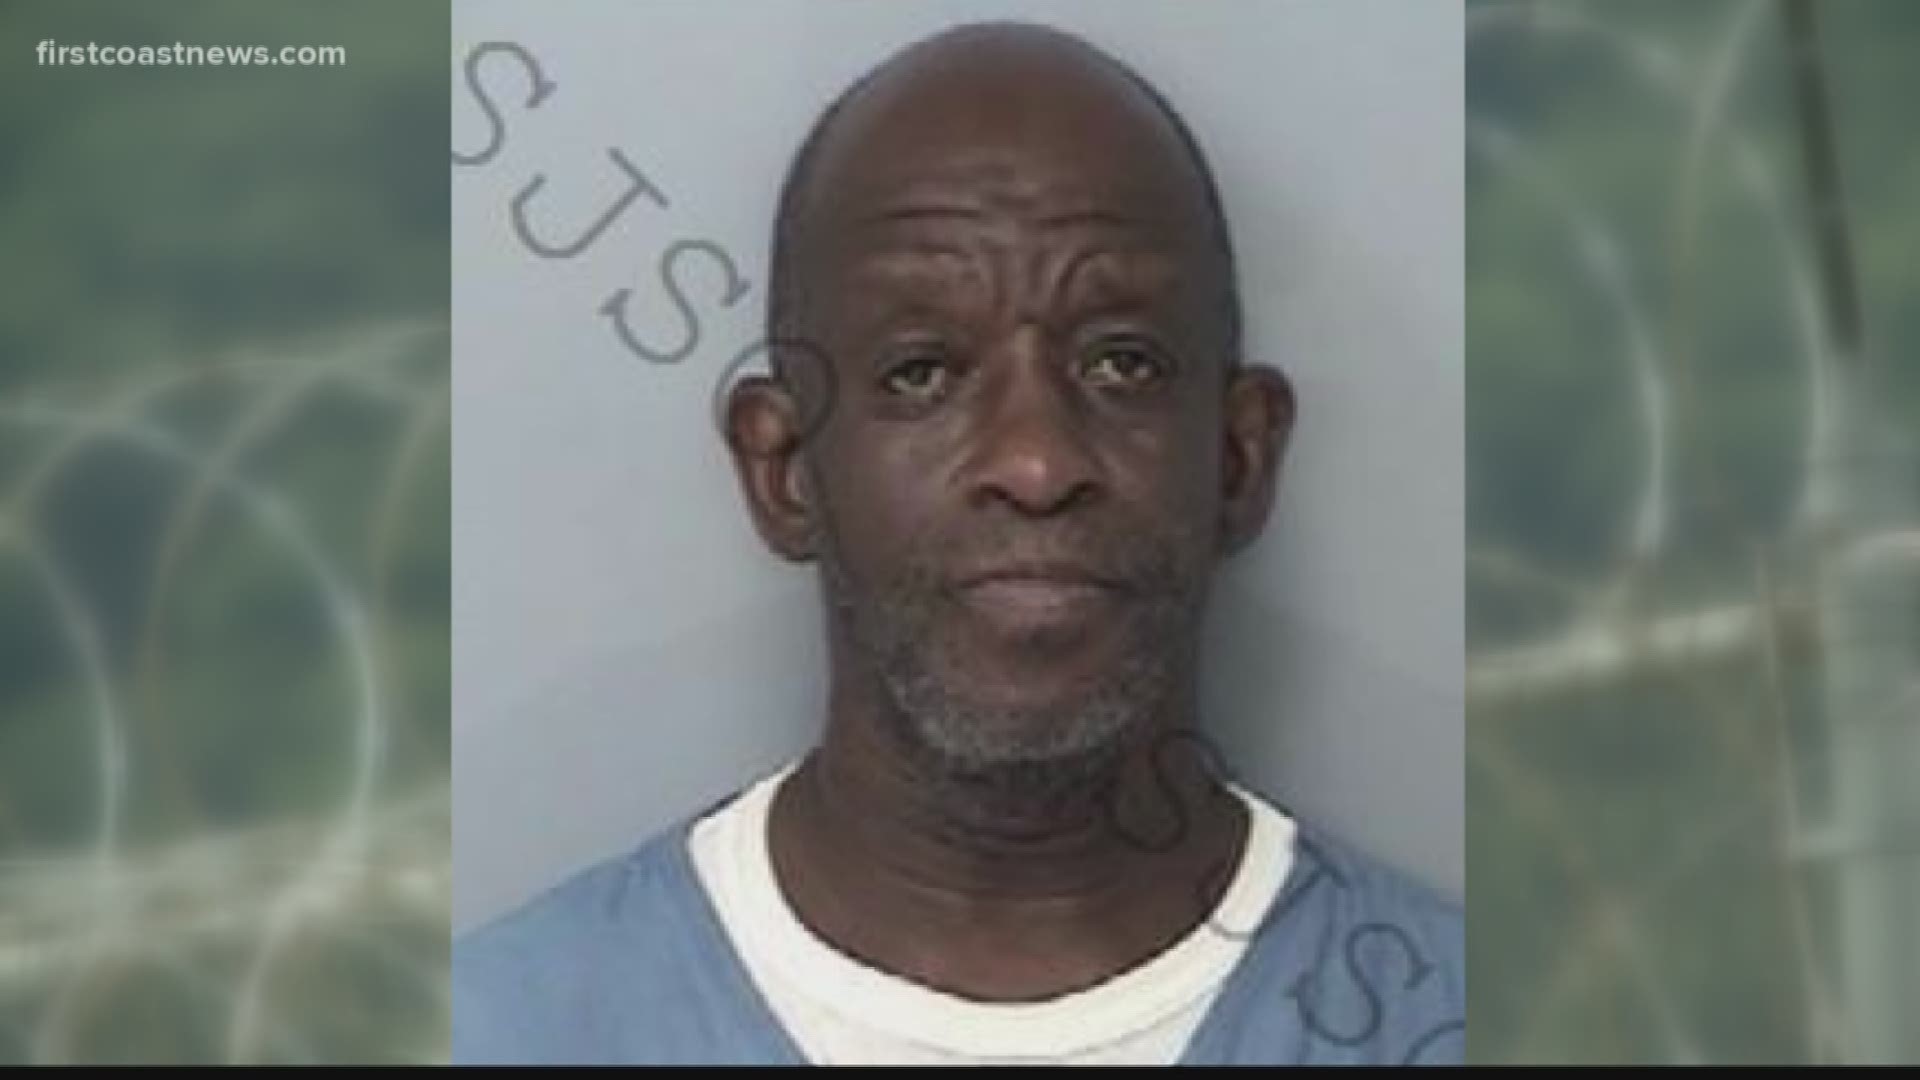 Lavale Fitzgerald McLeod, 57, has two prior sexual battery convictions on victims considered physically helpless to resist.